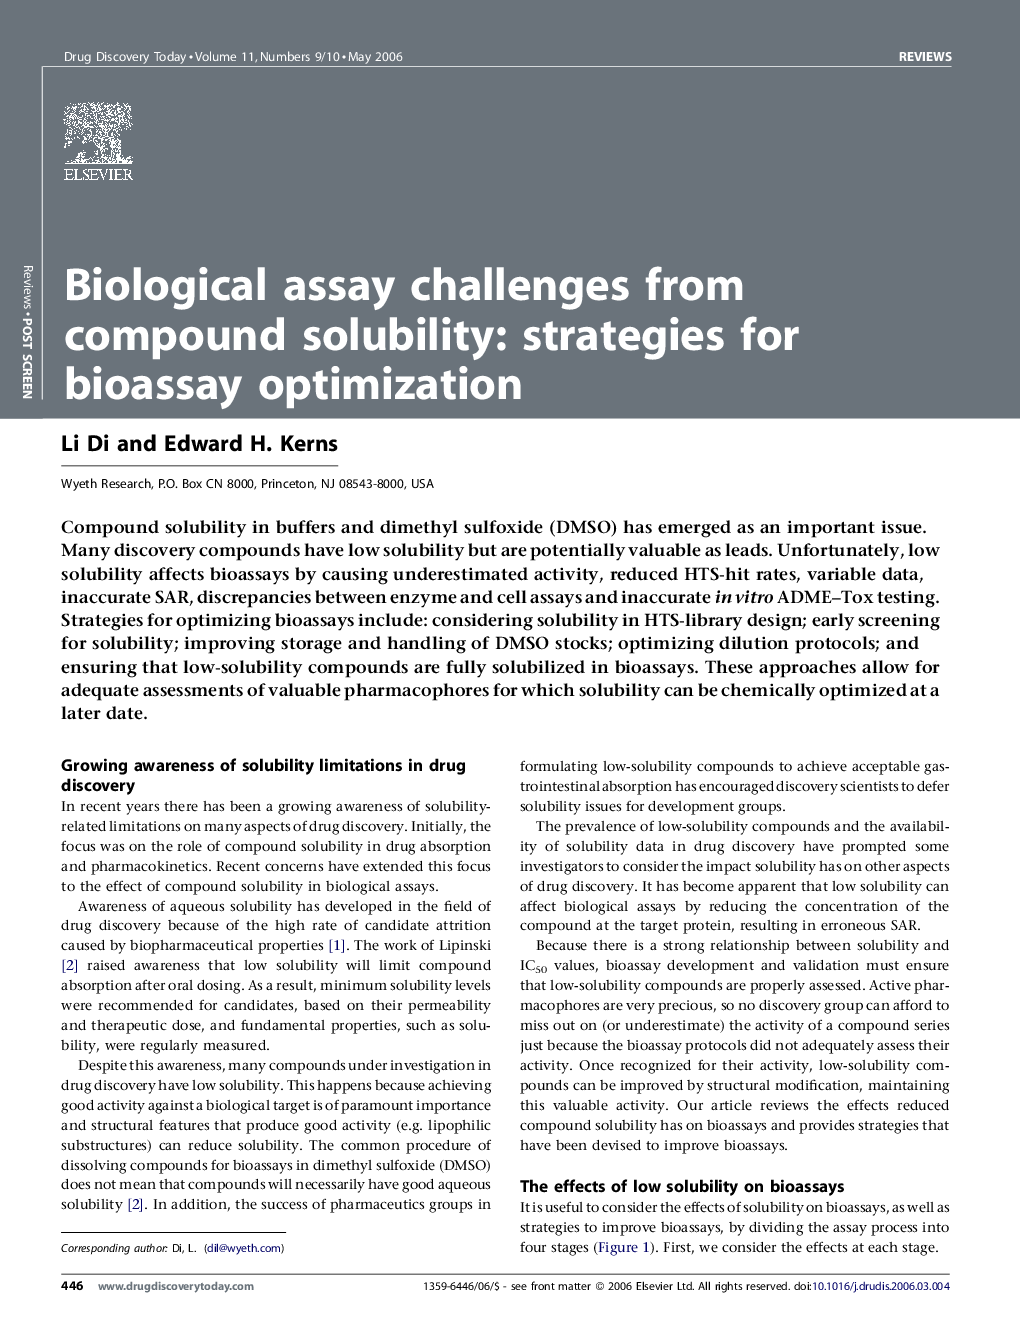 Biological assay challenges from compound solubility: strategies for bioassay optimization